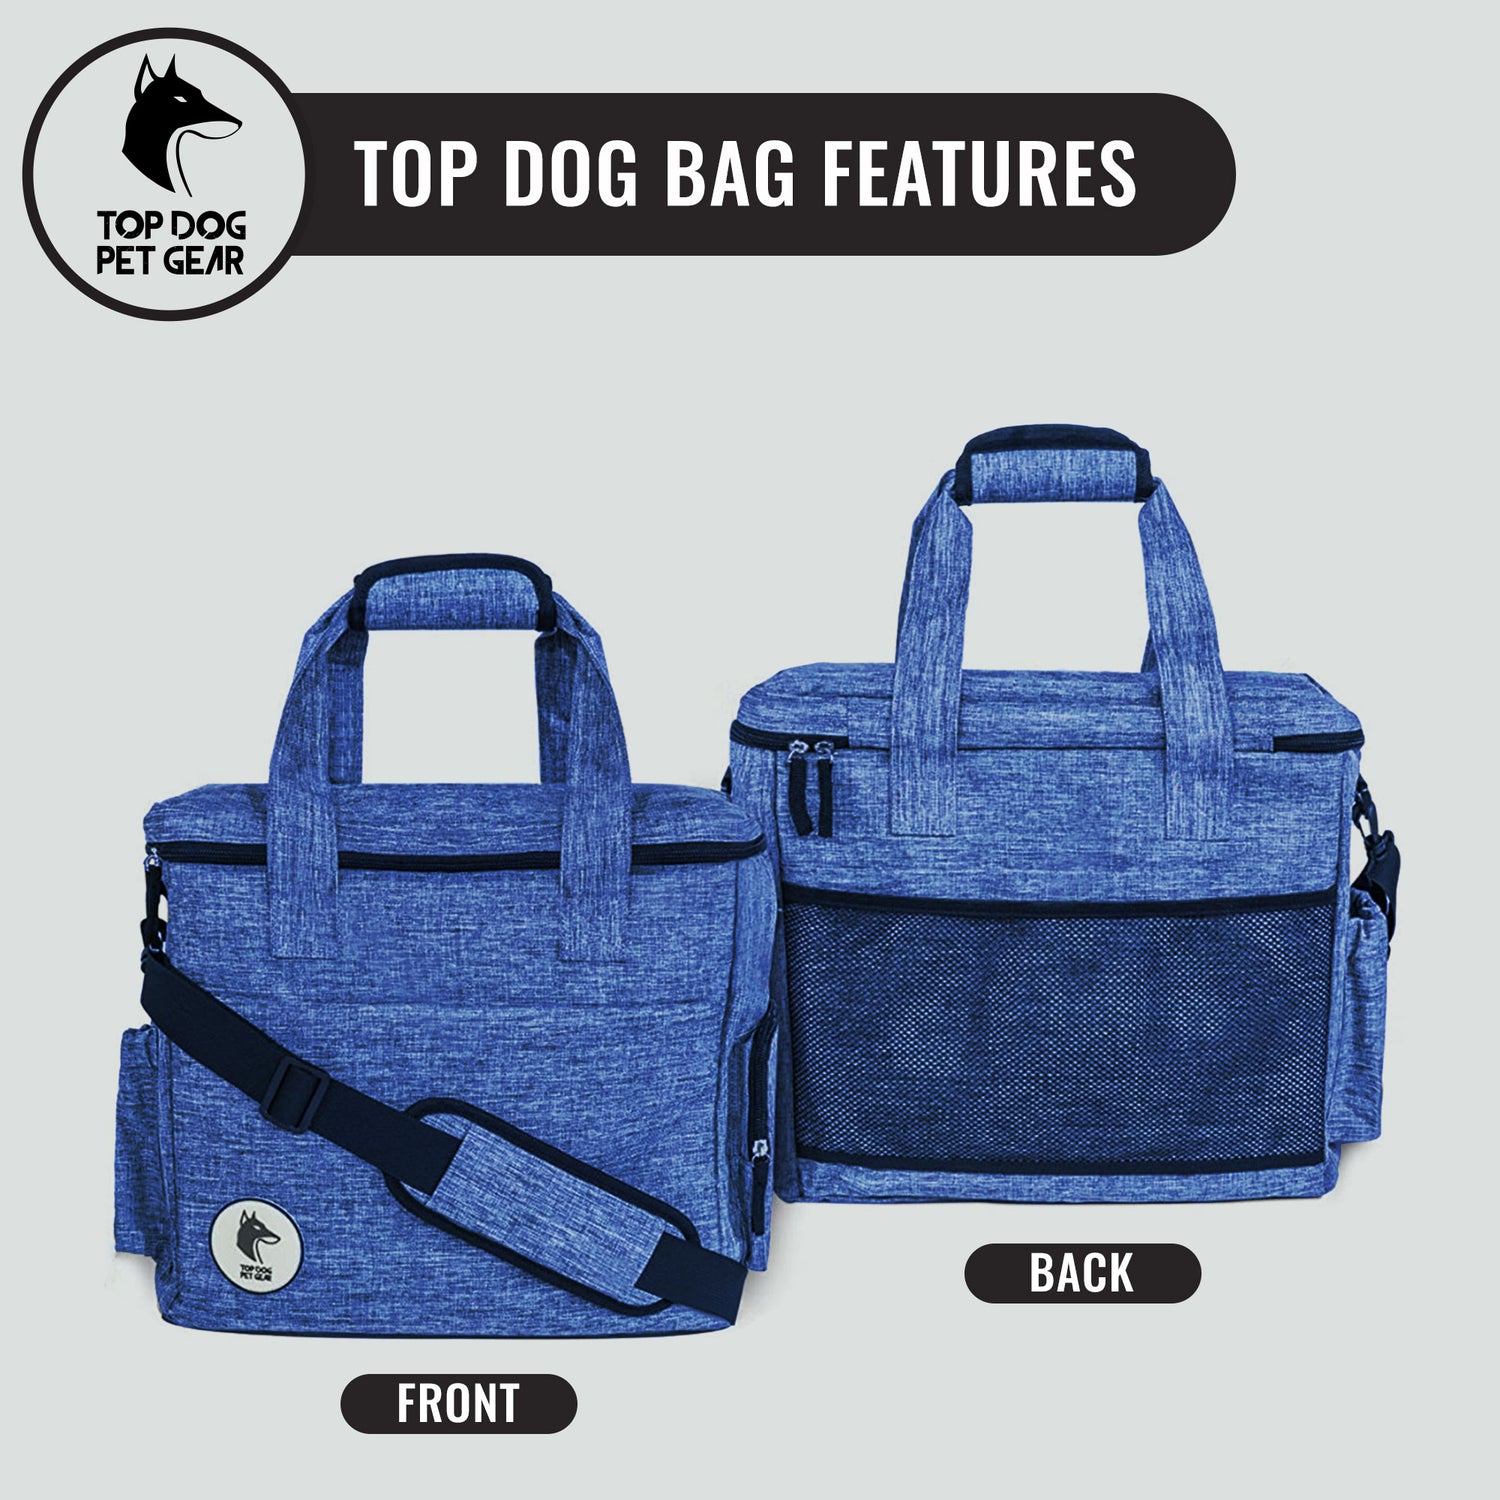 Dog Tote Bags, Dog Carrier Bags, Dog Travel Bags